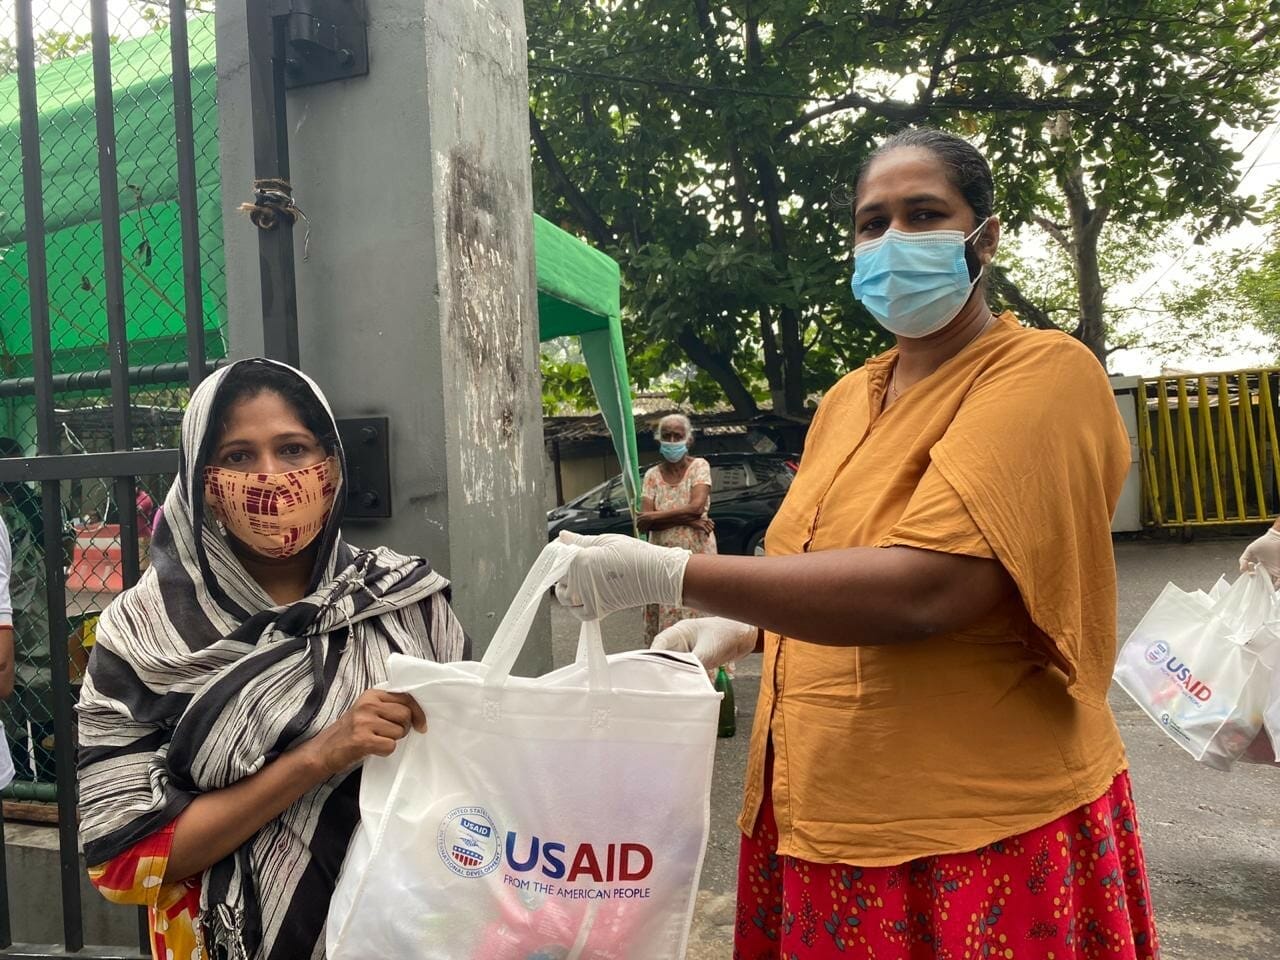 A CMC official hands over a USAID-donated hygiene pack to a resident at Modara flats